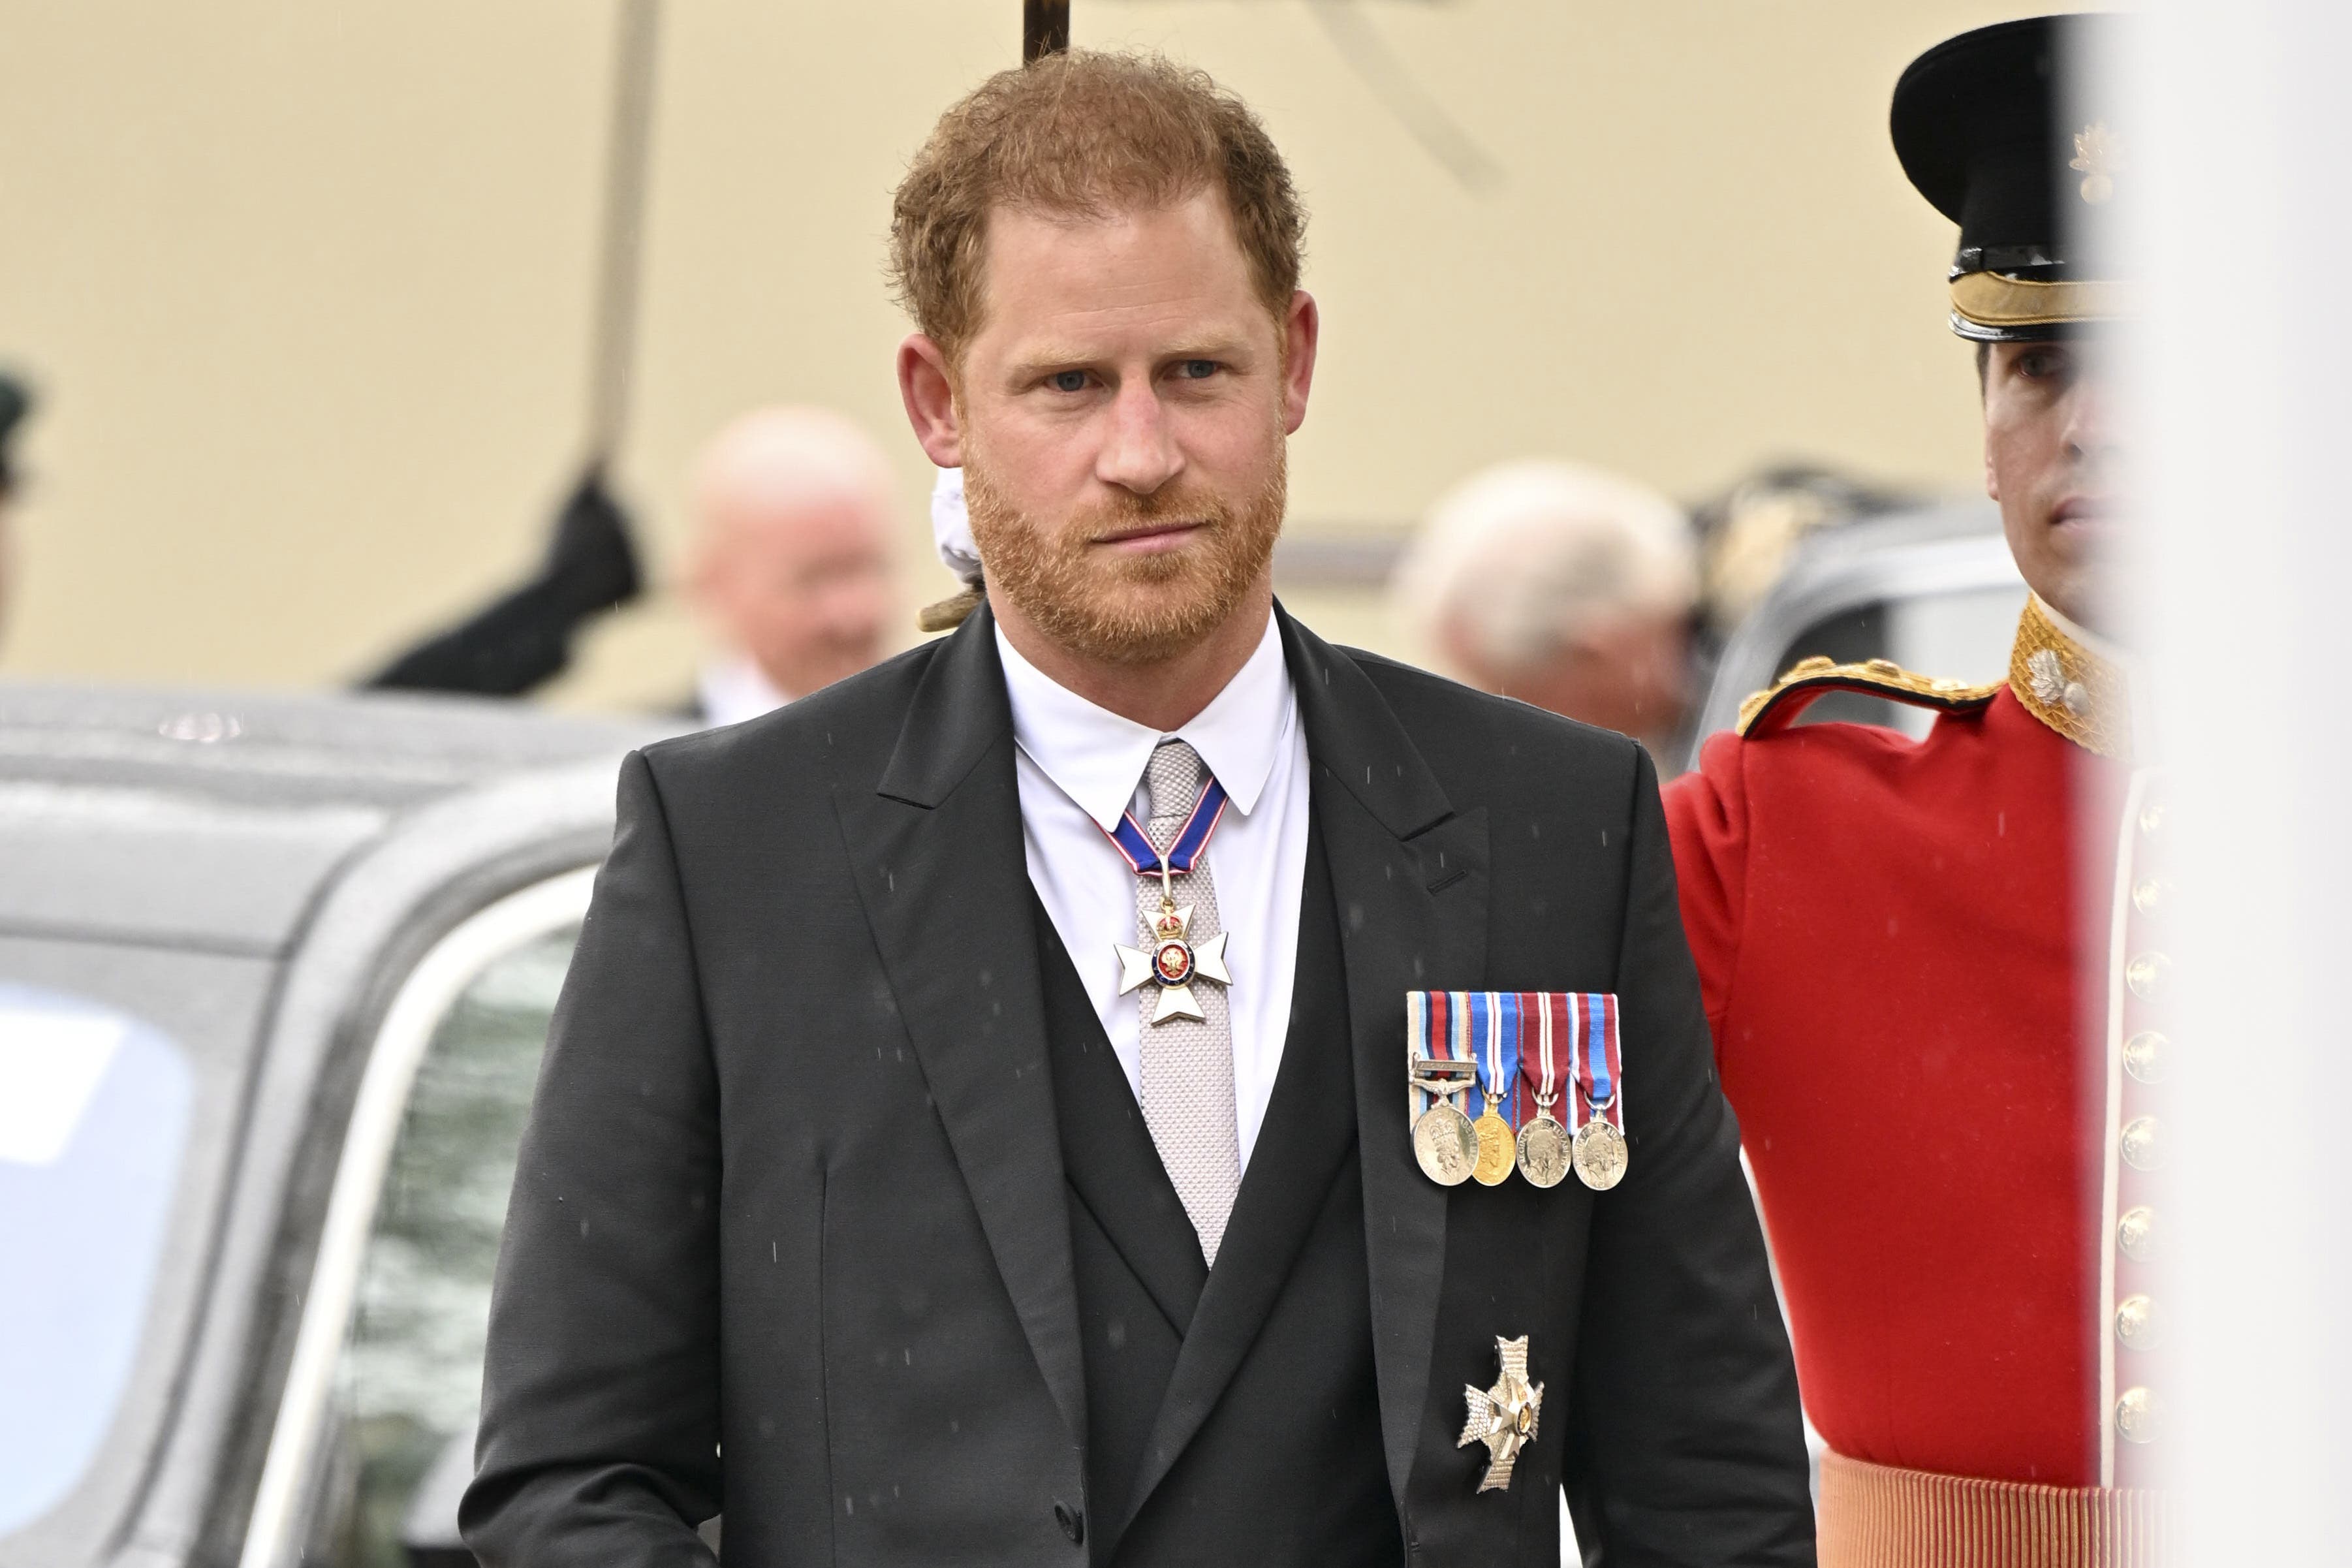 Prince Harry is involved in a number of cases against newspaper publishers